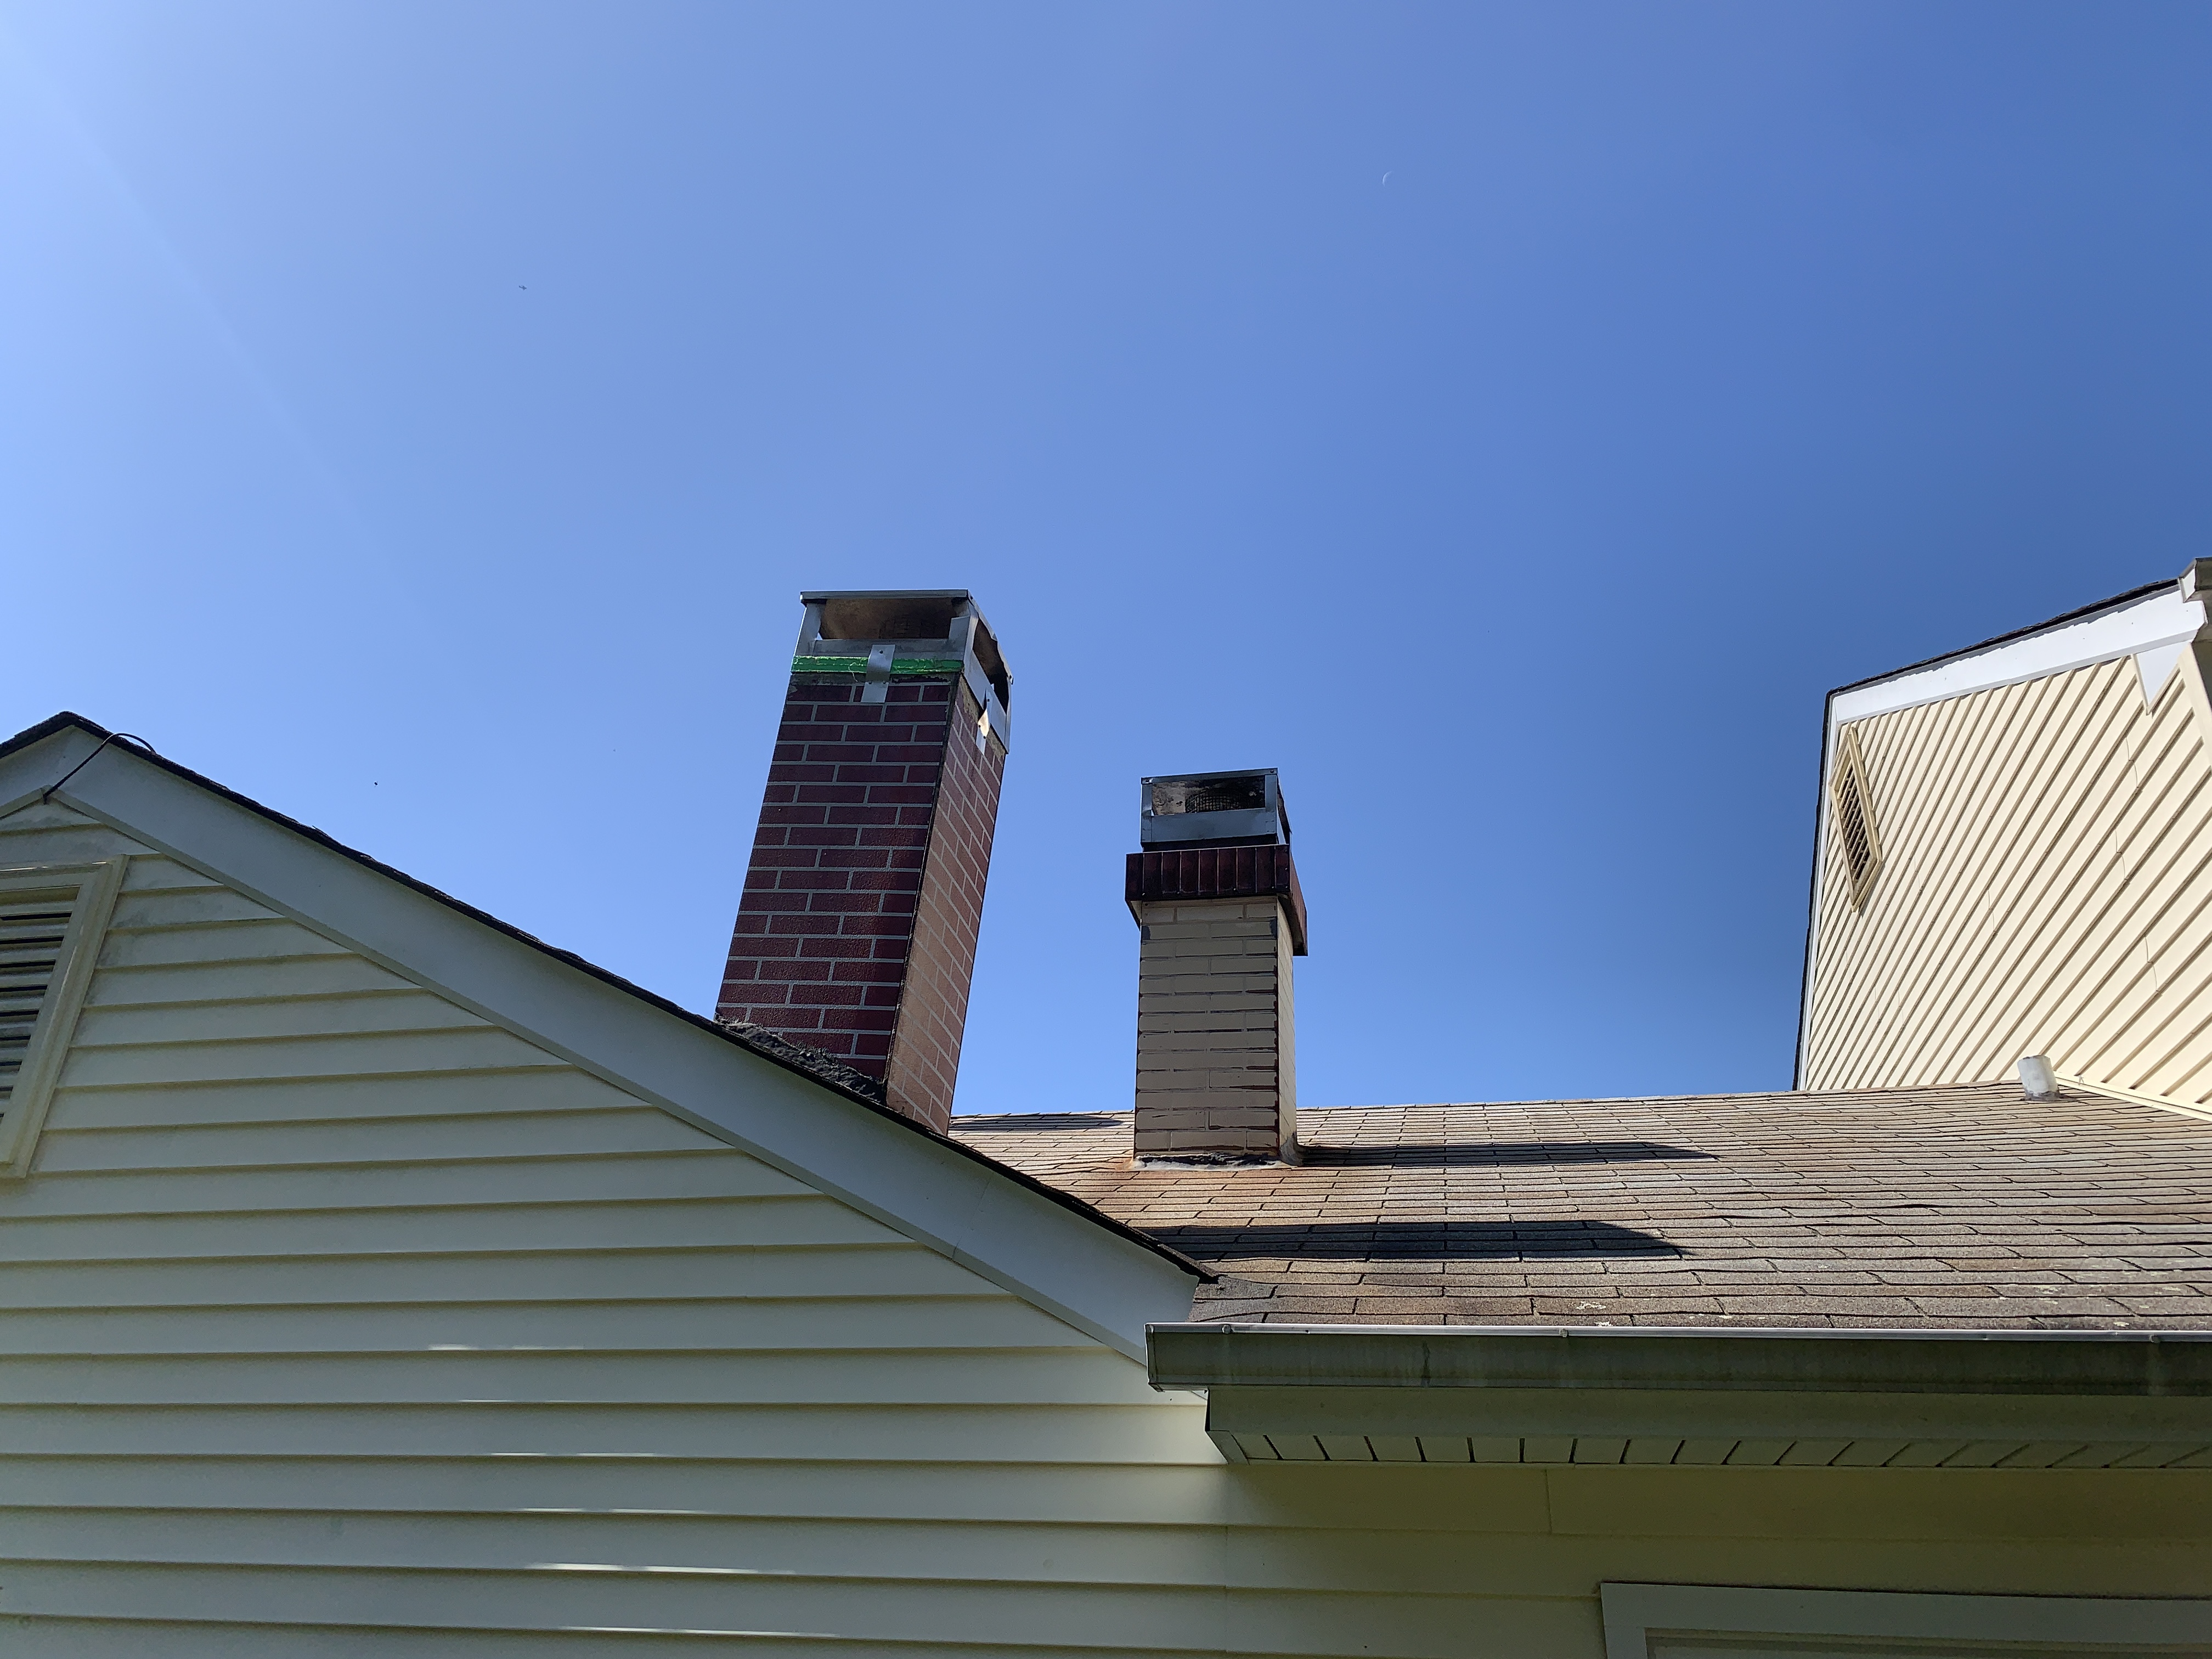 images/chimney_double_old.jpg